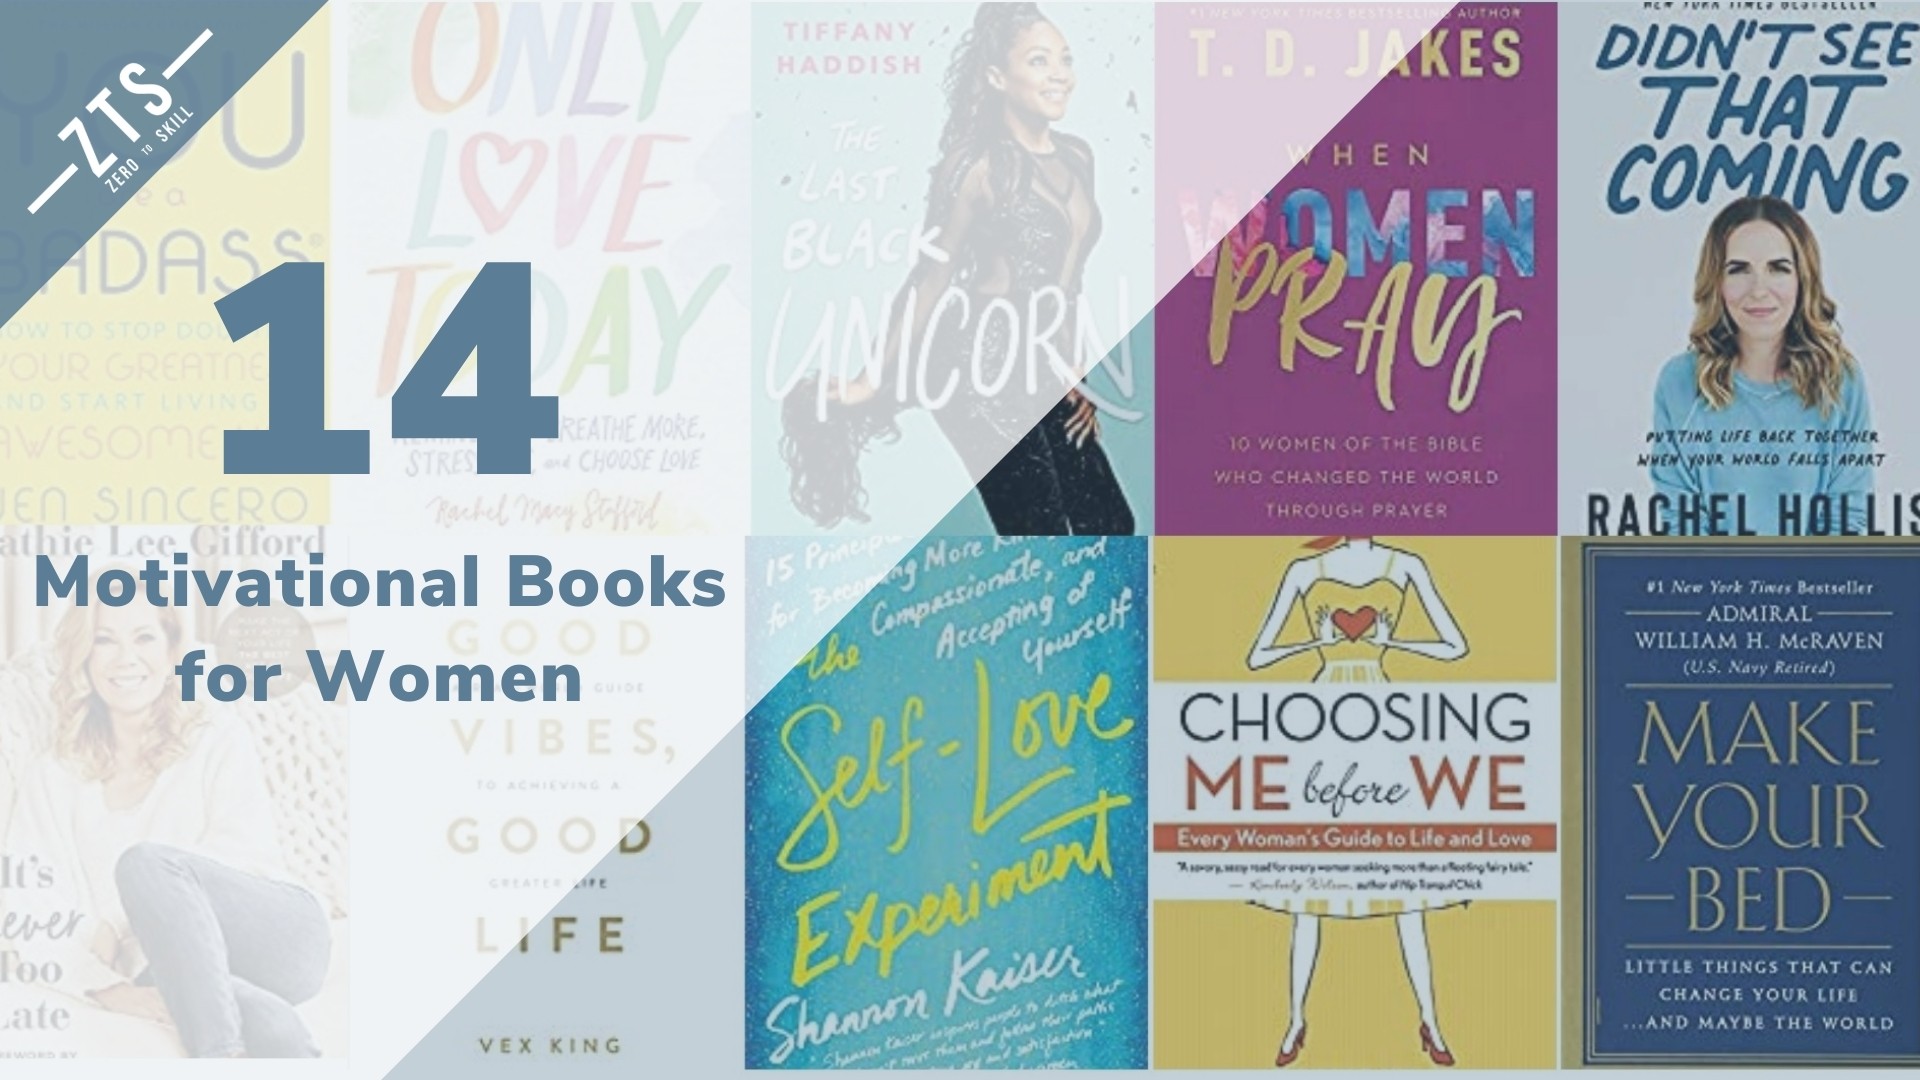 The Top 14 Motivational Books for Women